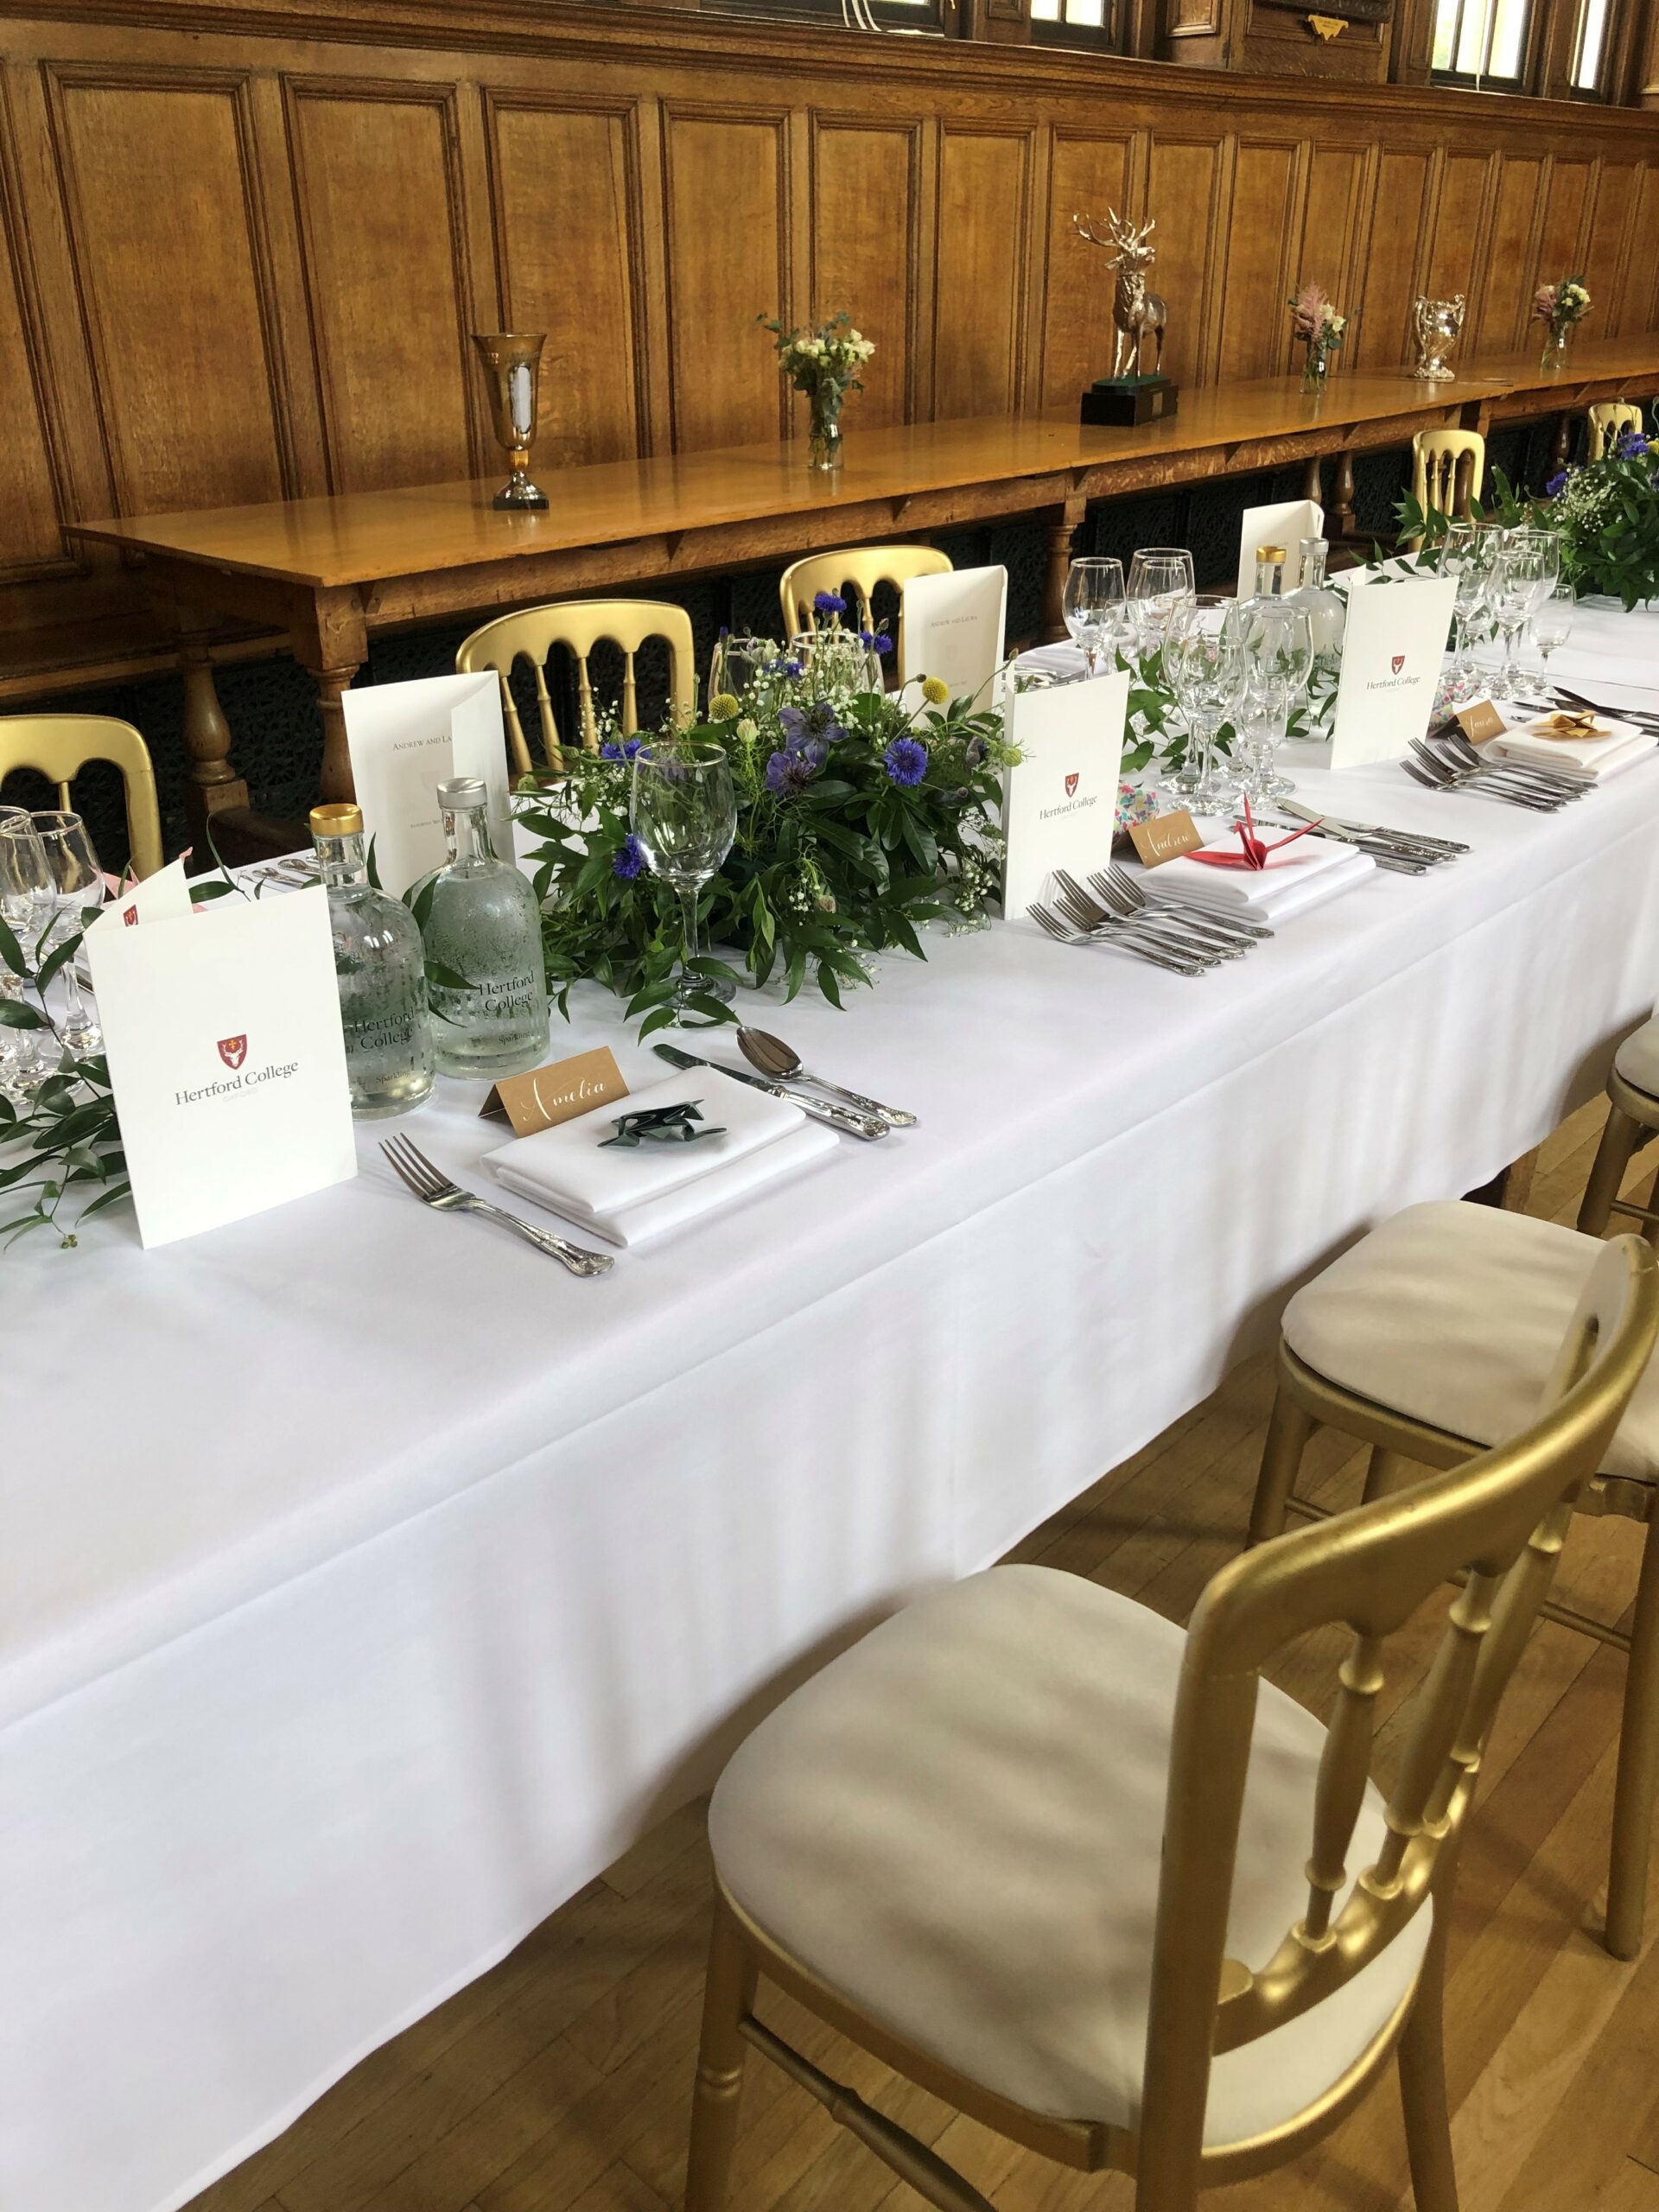 A long table with white table cloth, flower arrangements and gold chairs